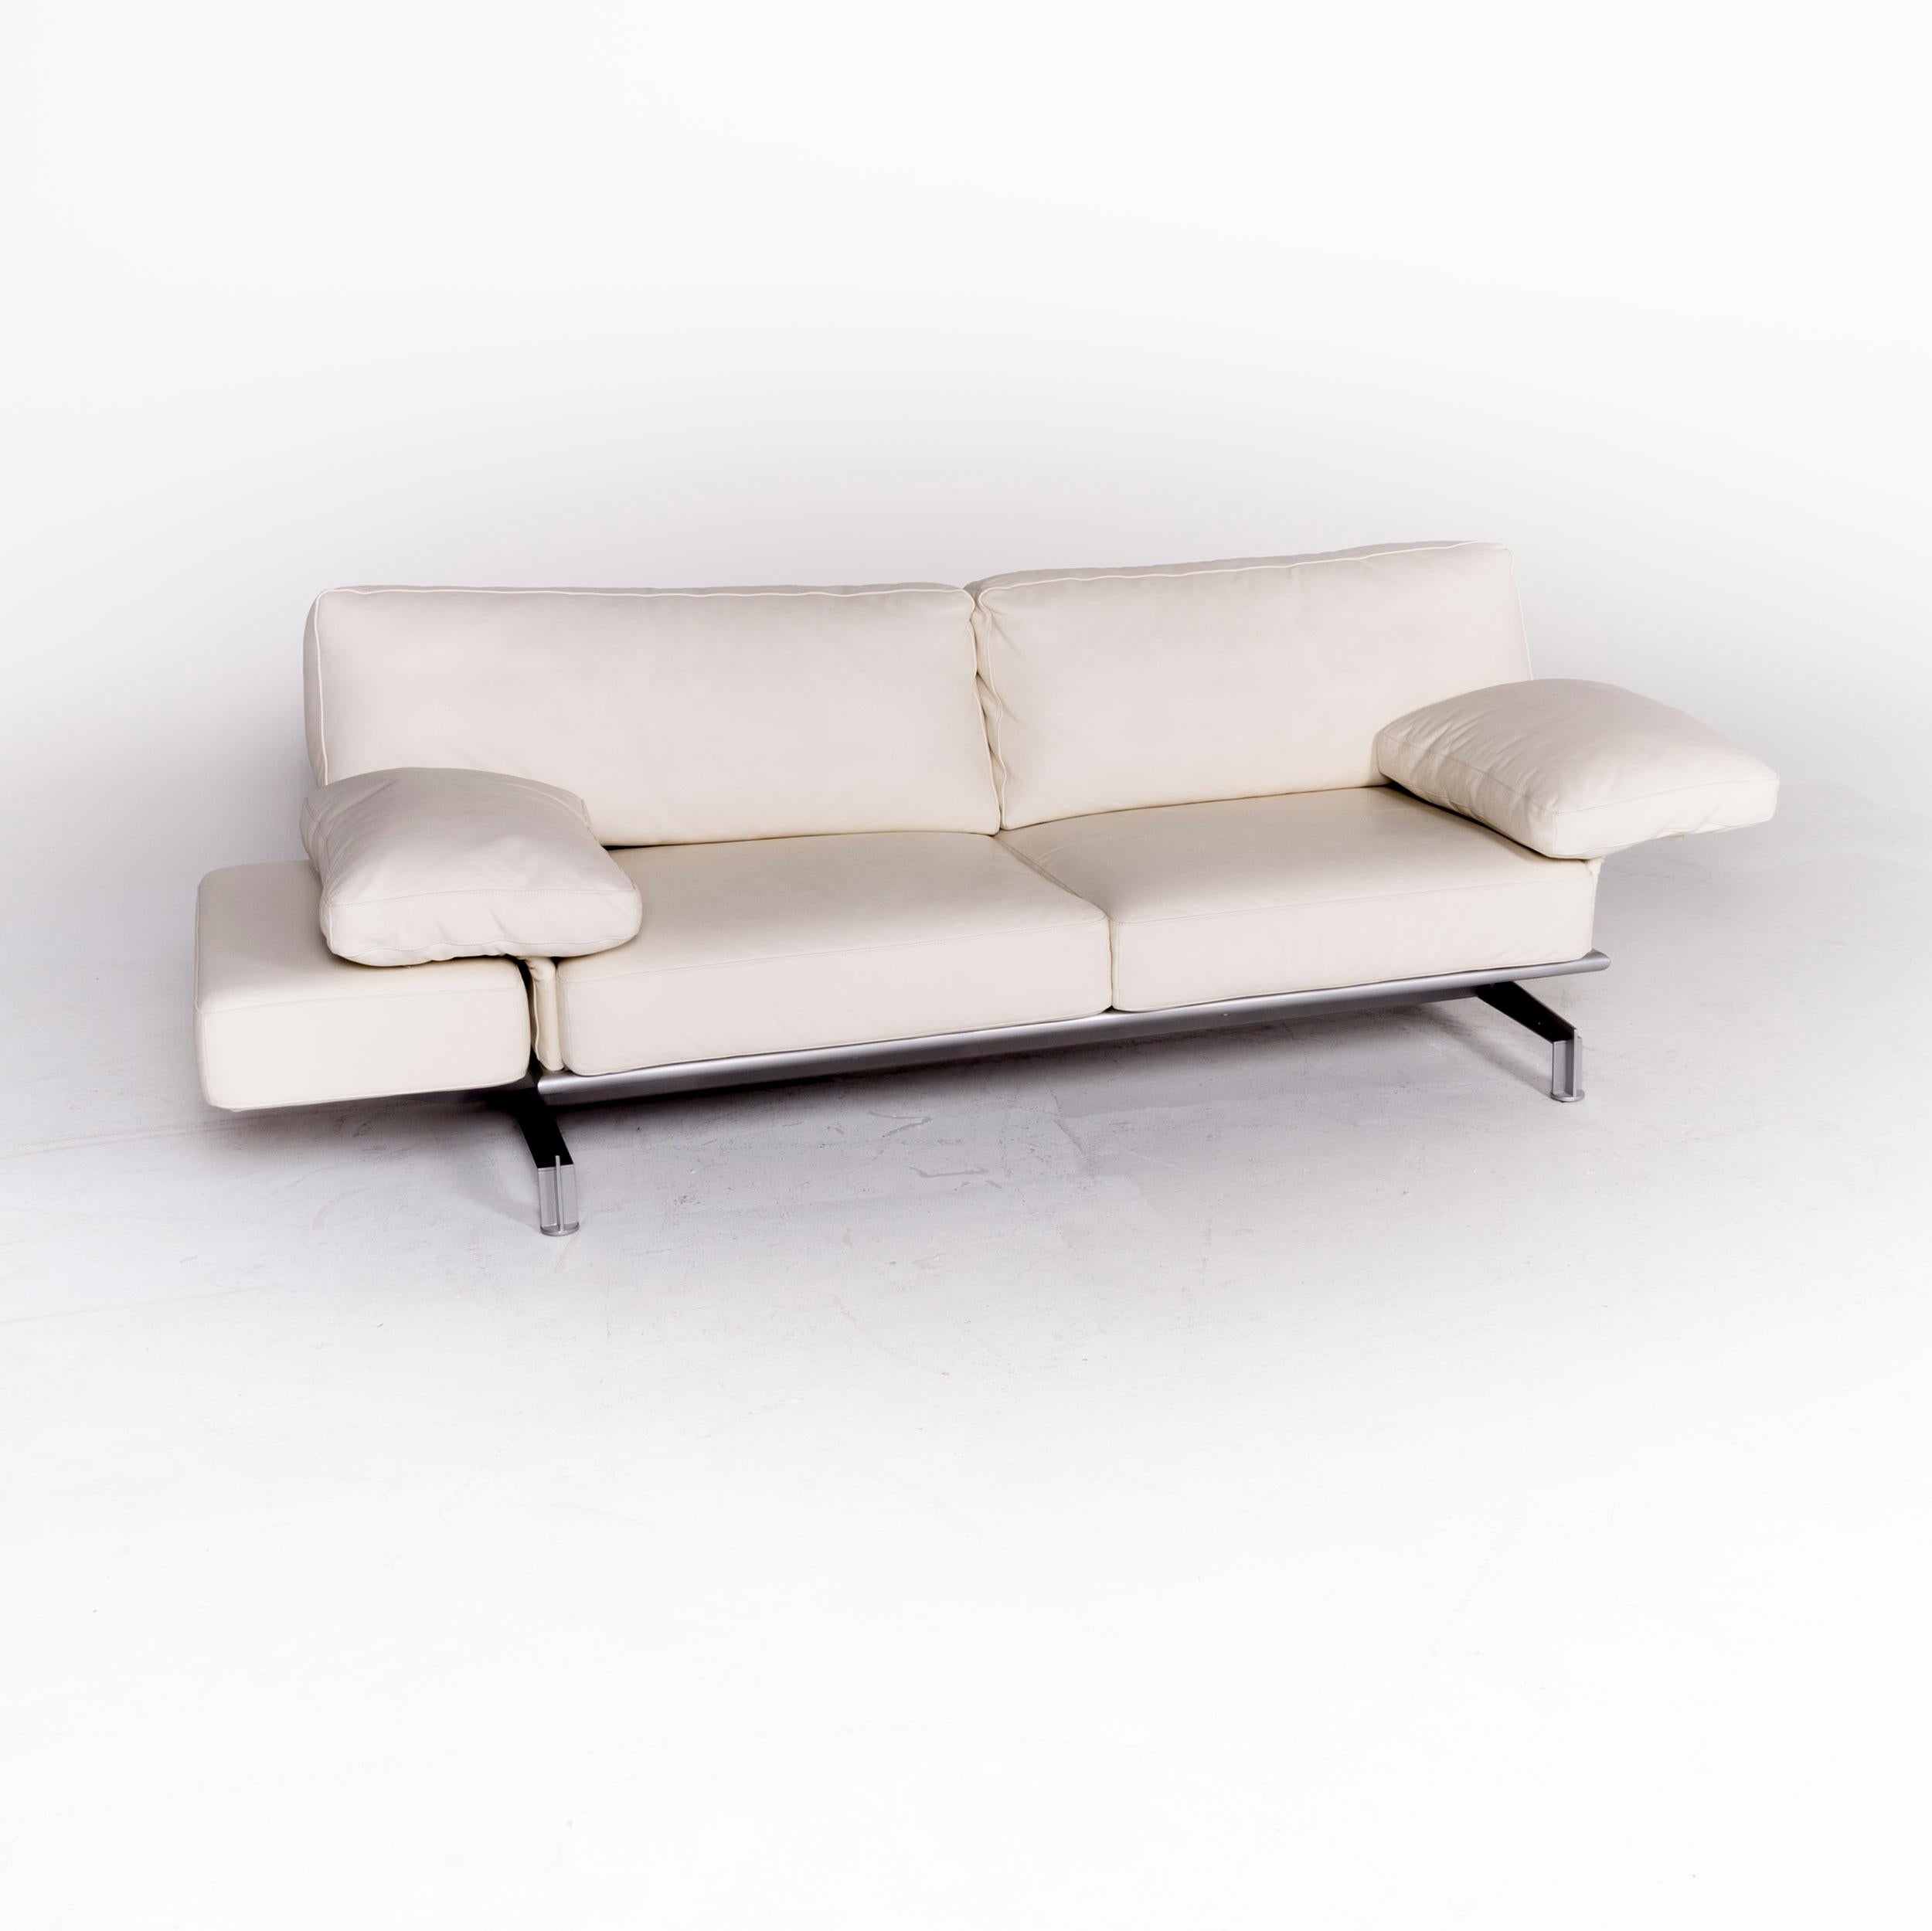 We bring to you a WK Wohnen Gaetano 687 designer leather sofa set white genuine leather.

Product measurements in centimeters:

Depth 90
Width 210
Height 76
Seat-height 42
Rest-height 59
Seat-depth 50
Seat-width 145
Back-height